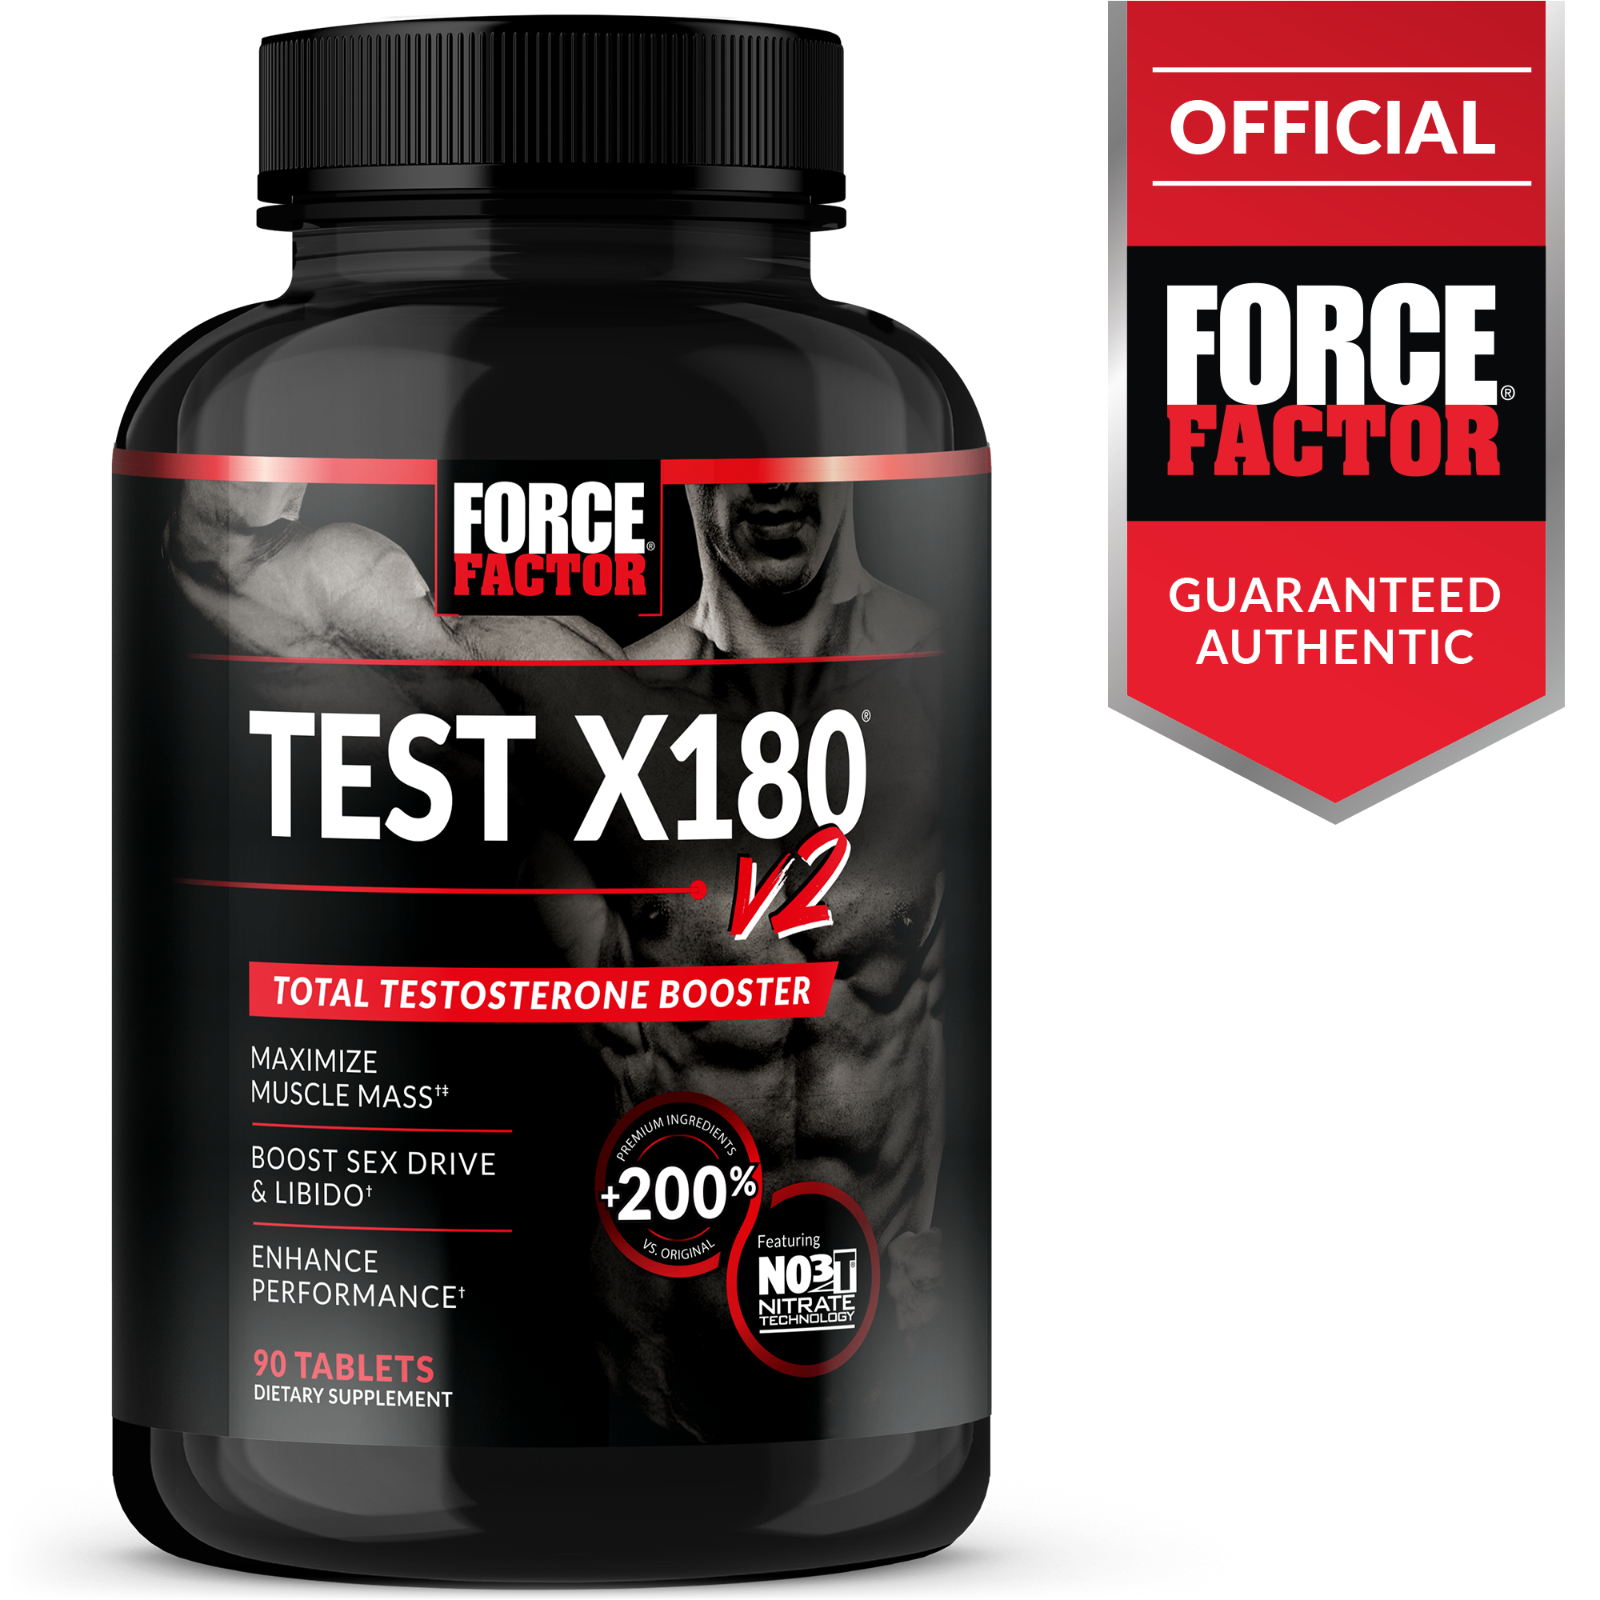 Force Factor TEST X180 Male Vitality Maximize Muscle Mass 60 Capsules Exp.04/202 - $54.99